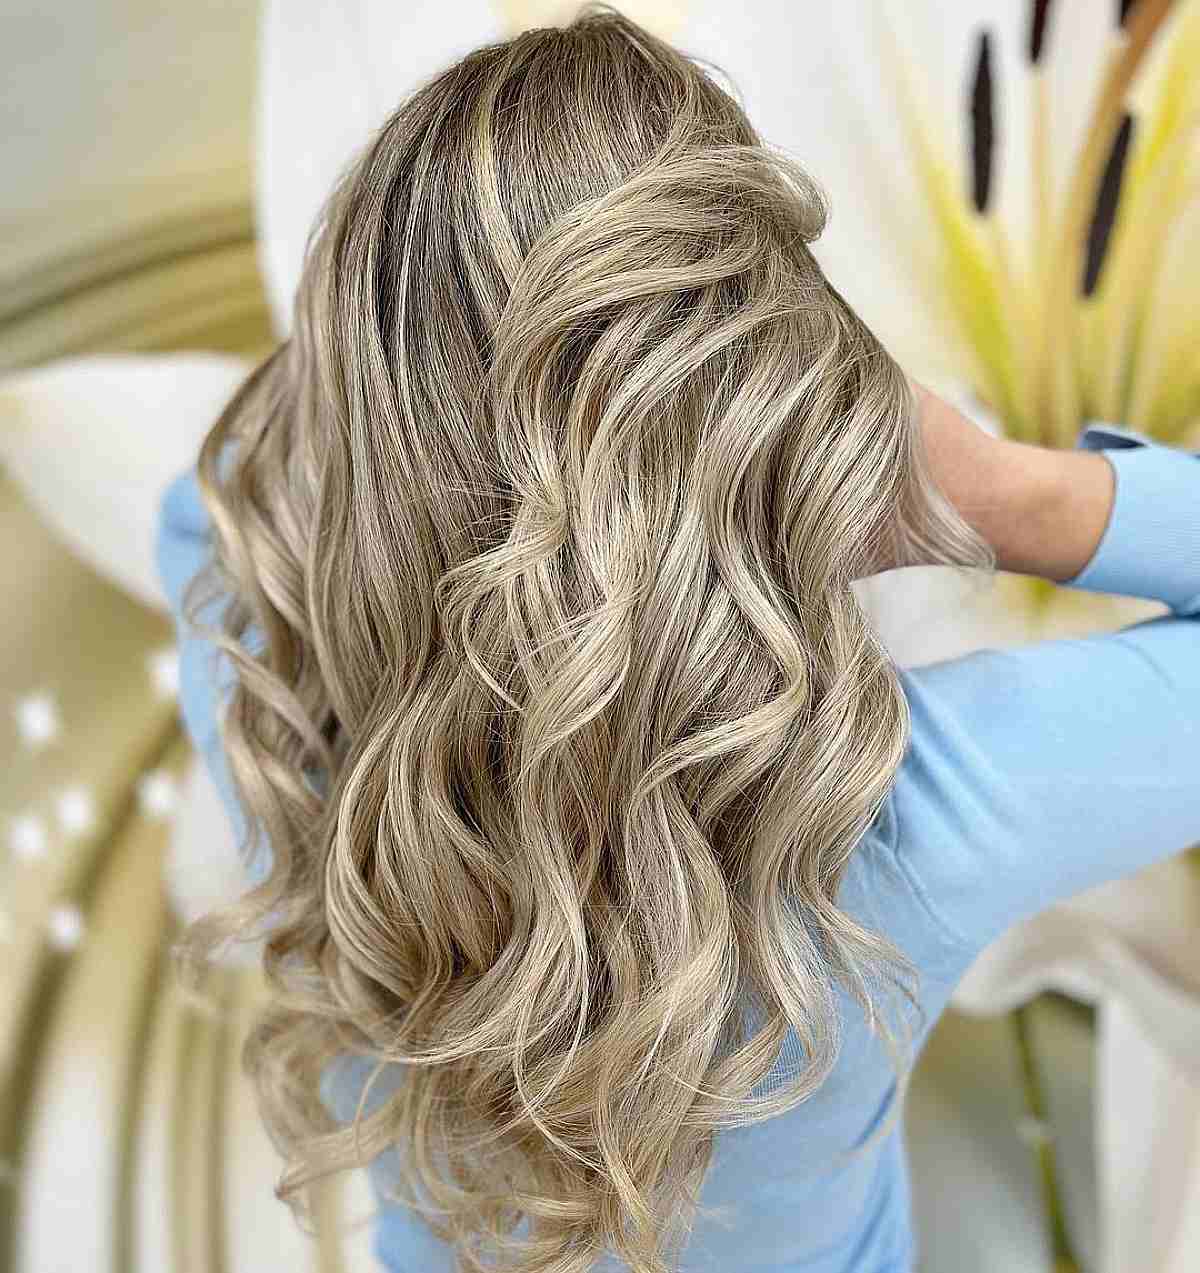 Curled Long Hair with Light Blonde Highlights